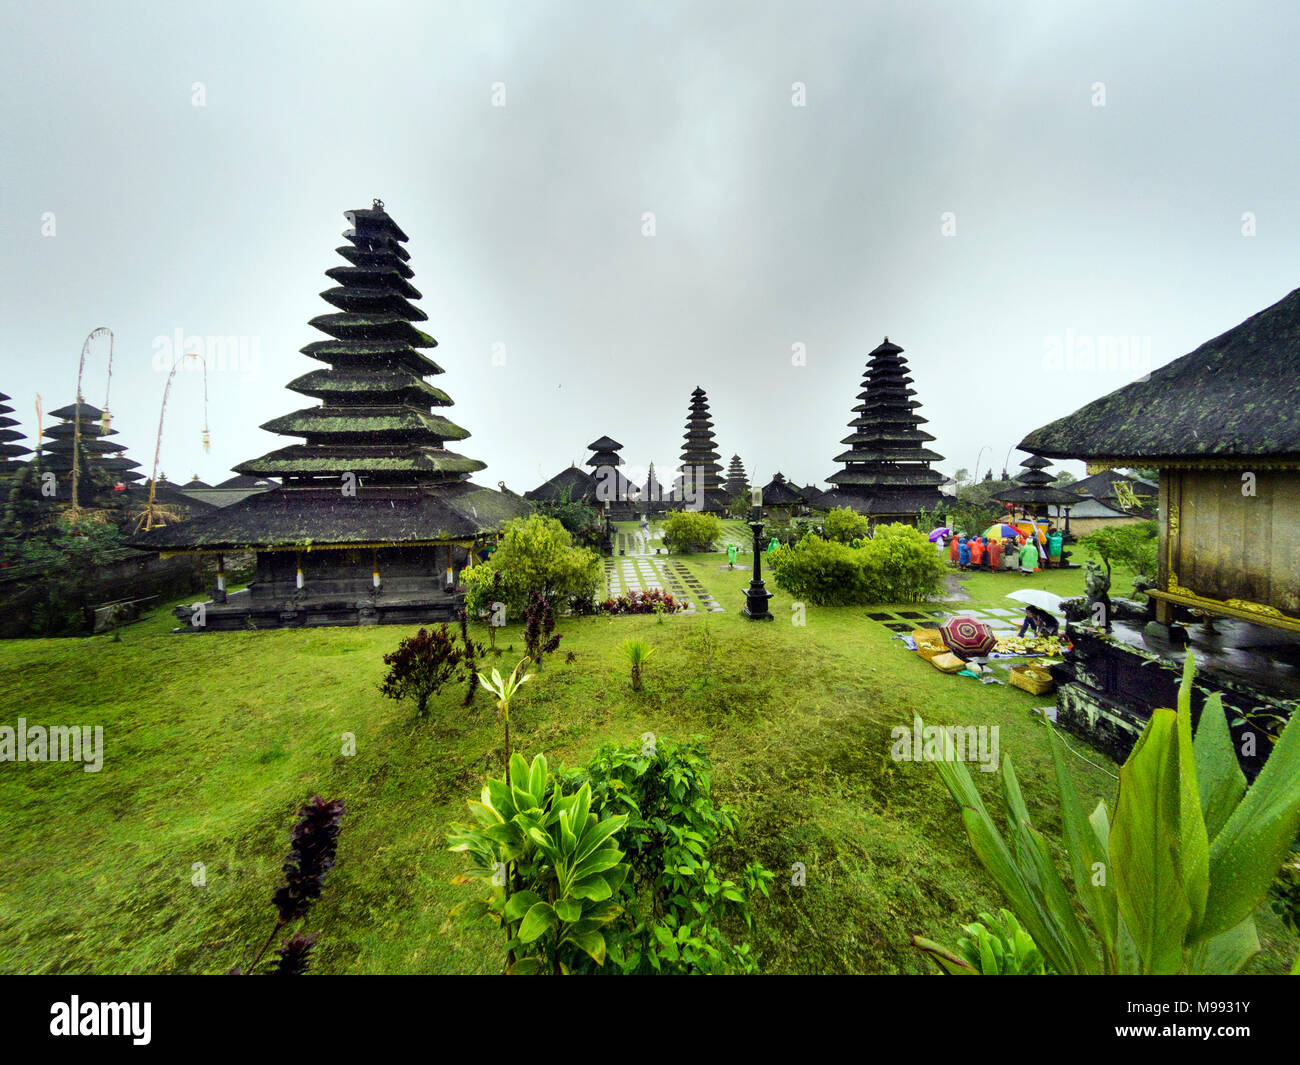 Besakih temple architectural at Bali Indonesia under a rainy weather. Stock Photo